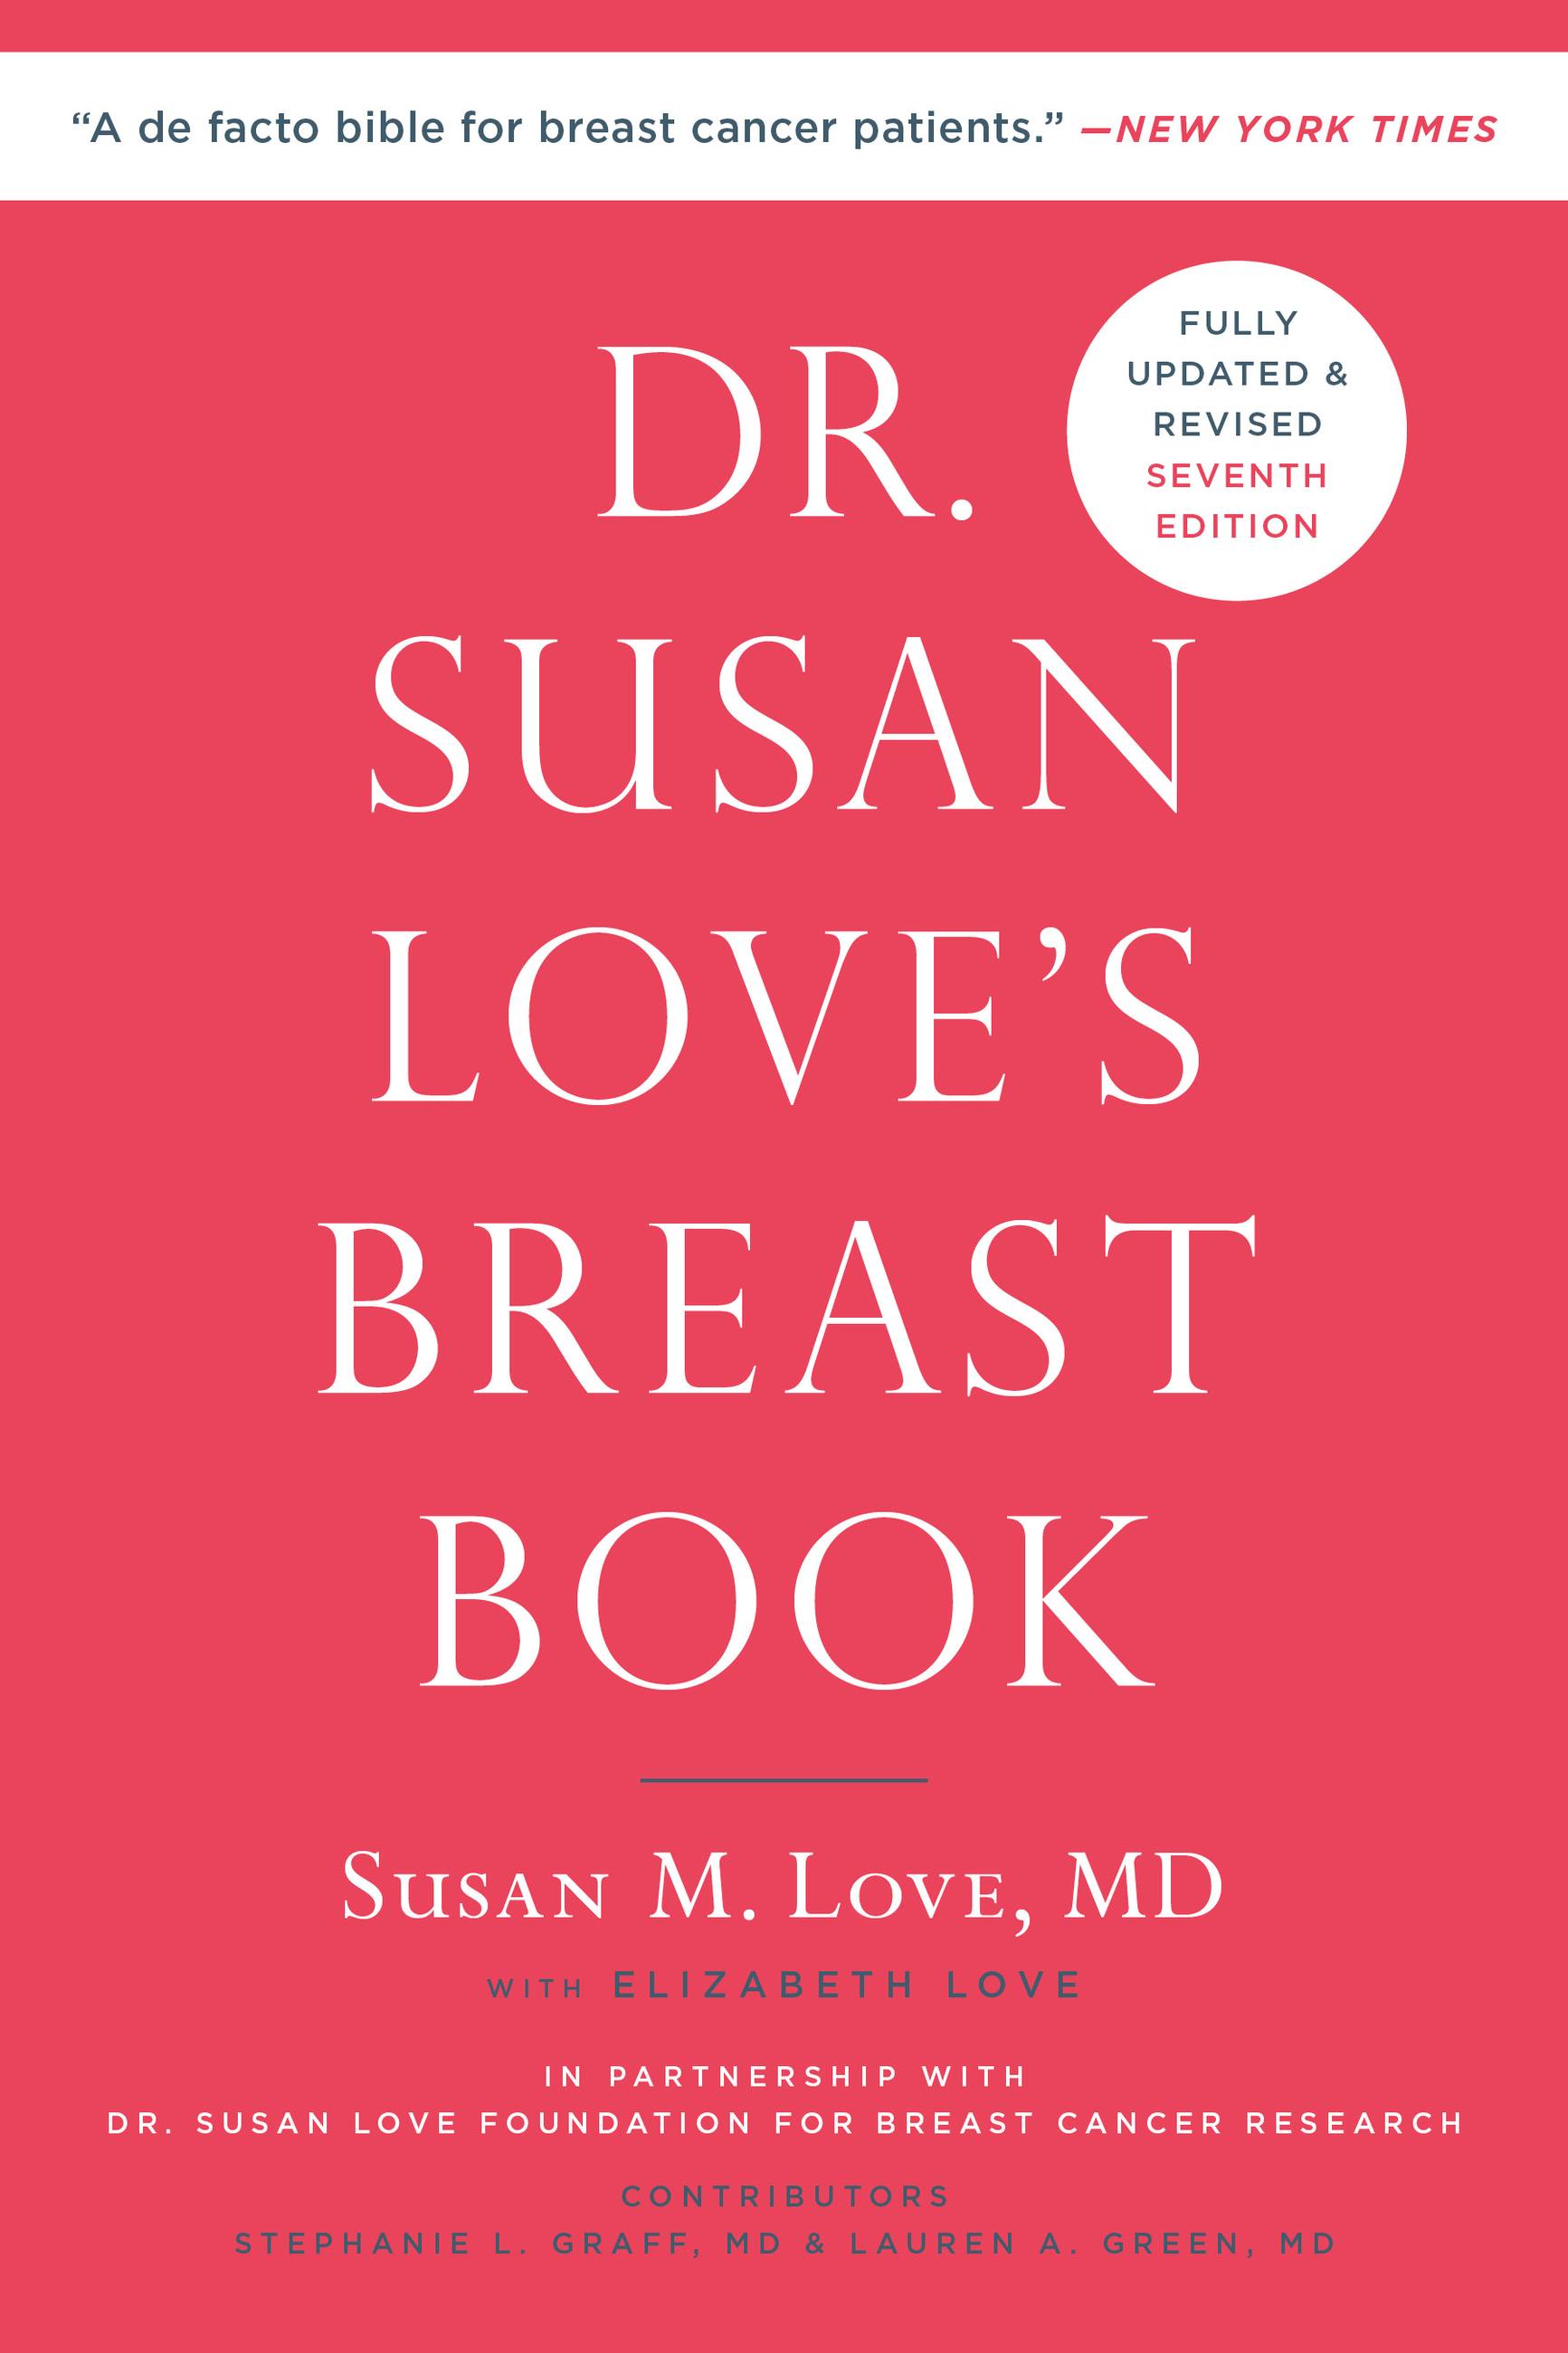 Group　Susan　Love's　Hachette　Book　Breast　M.　Dr.　MD　Love,　Susan　by　Book